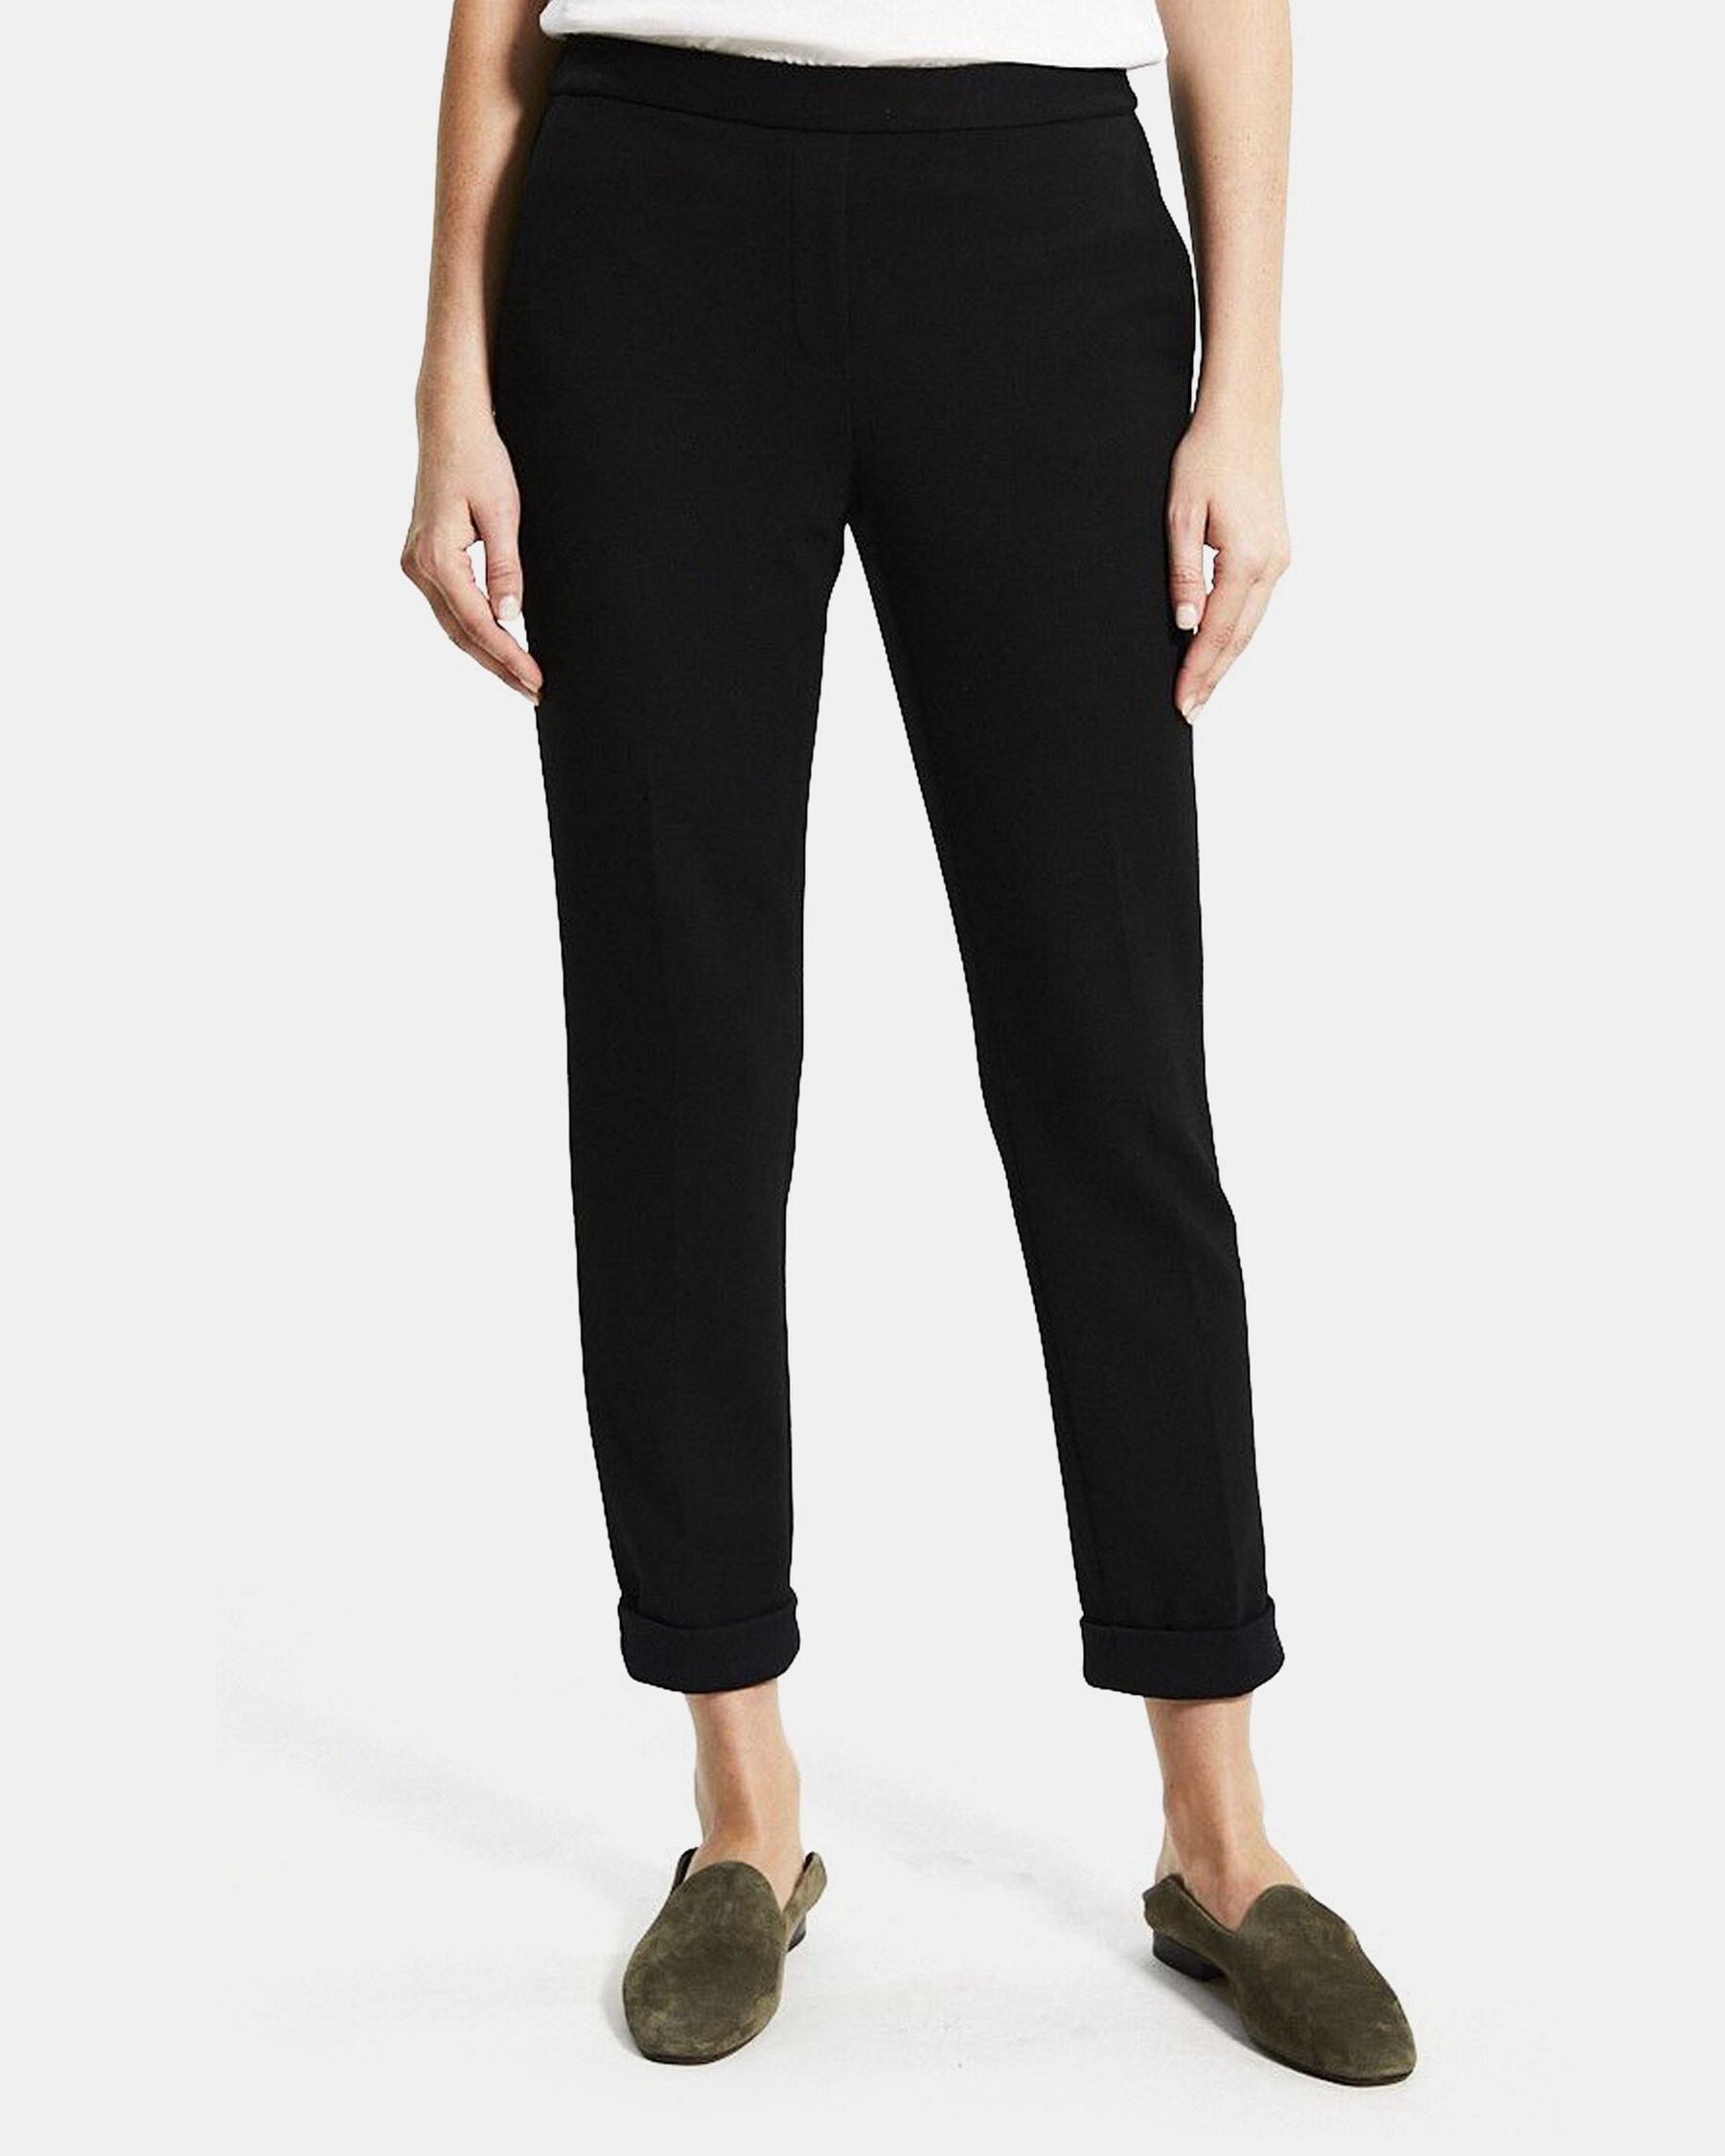 Theory Slim Cropped Pull-On Pant in Double-Knit Jersey